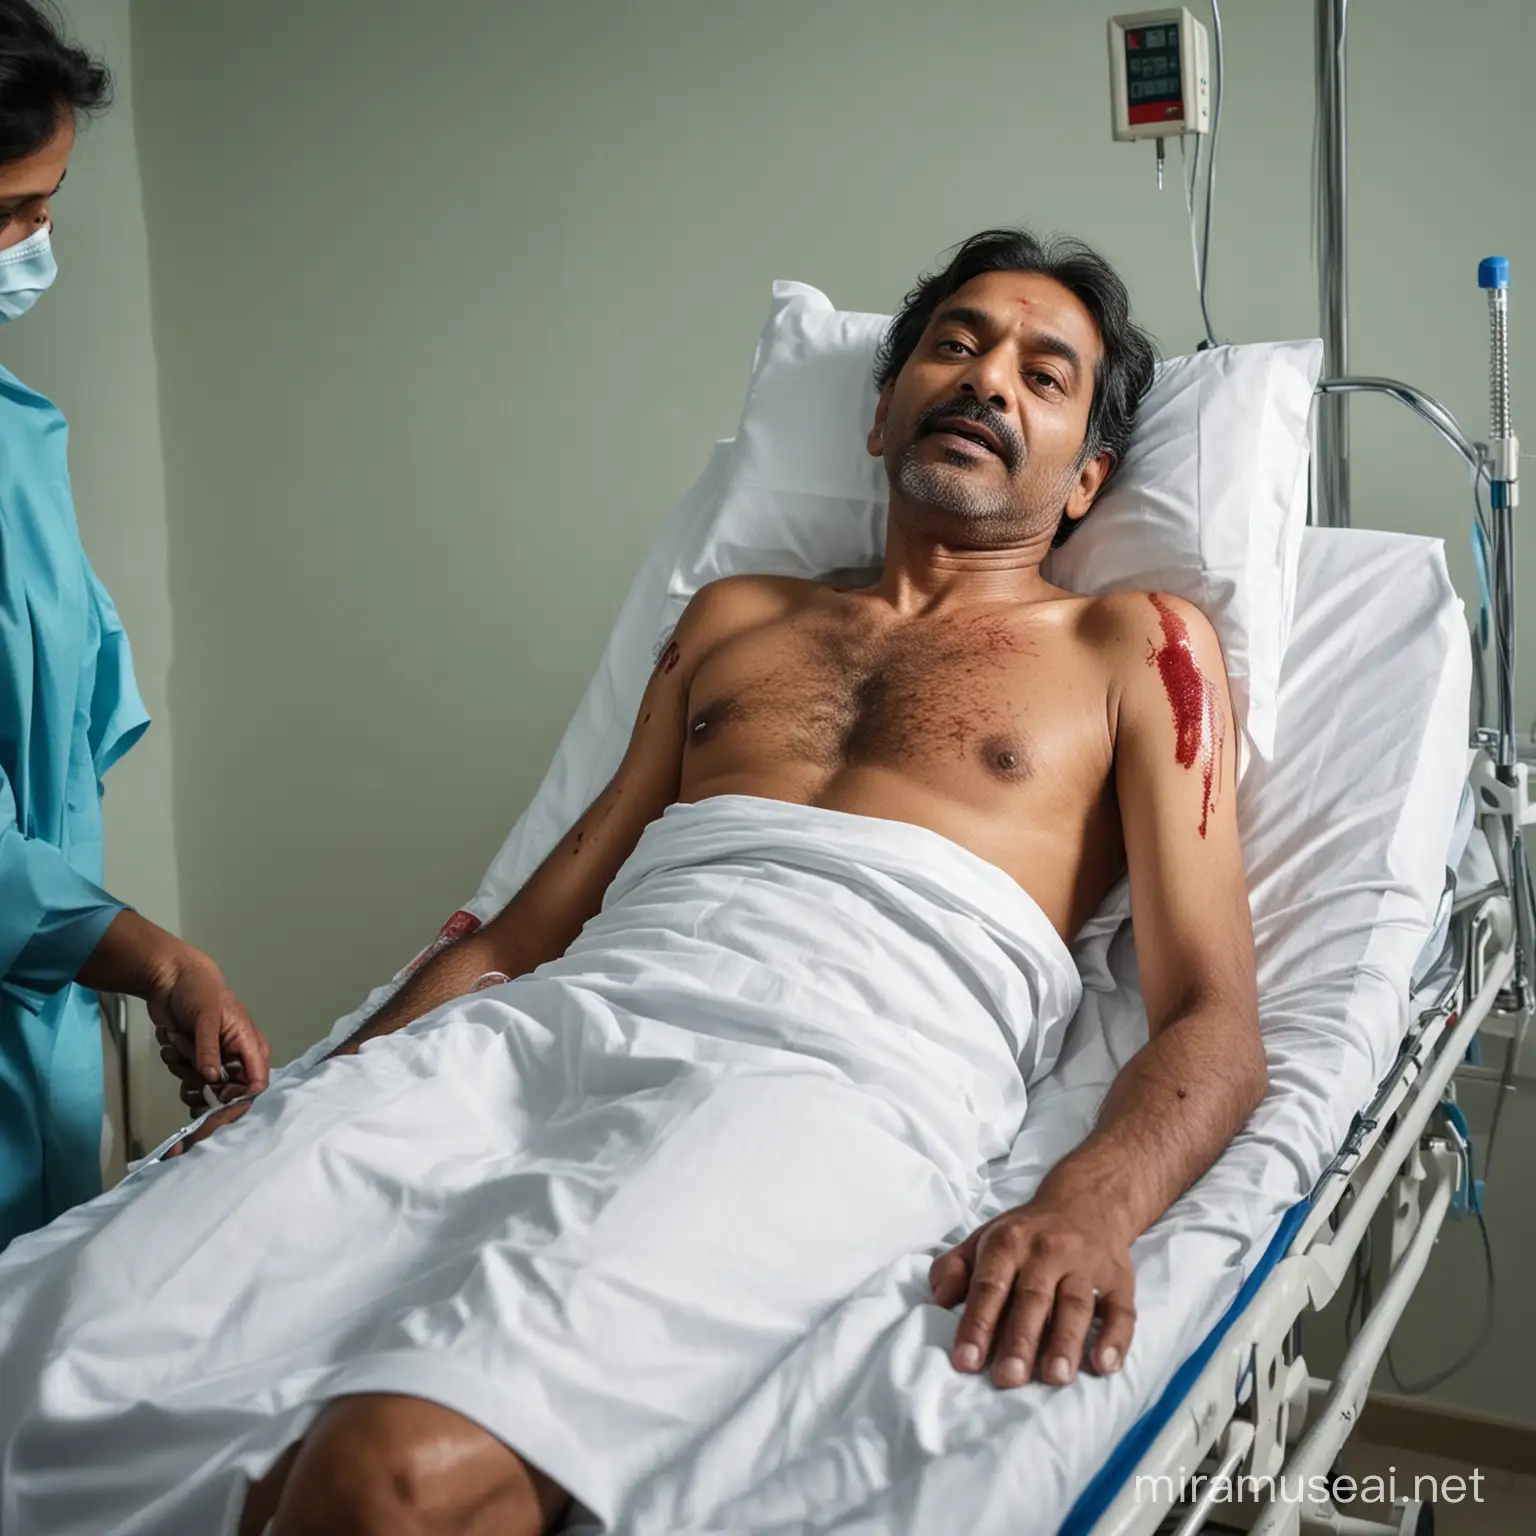 Unconscious MiddleAged Patient in Hospital Reception Indian Man with Blood Loss on Stretcher